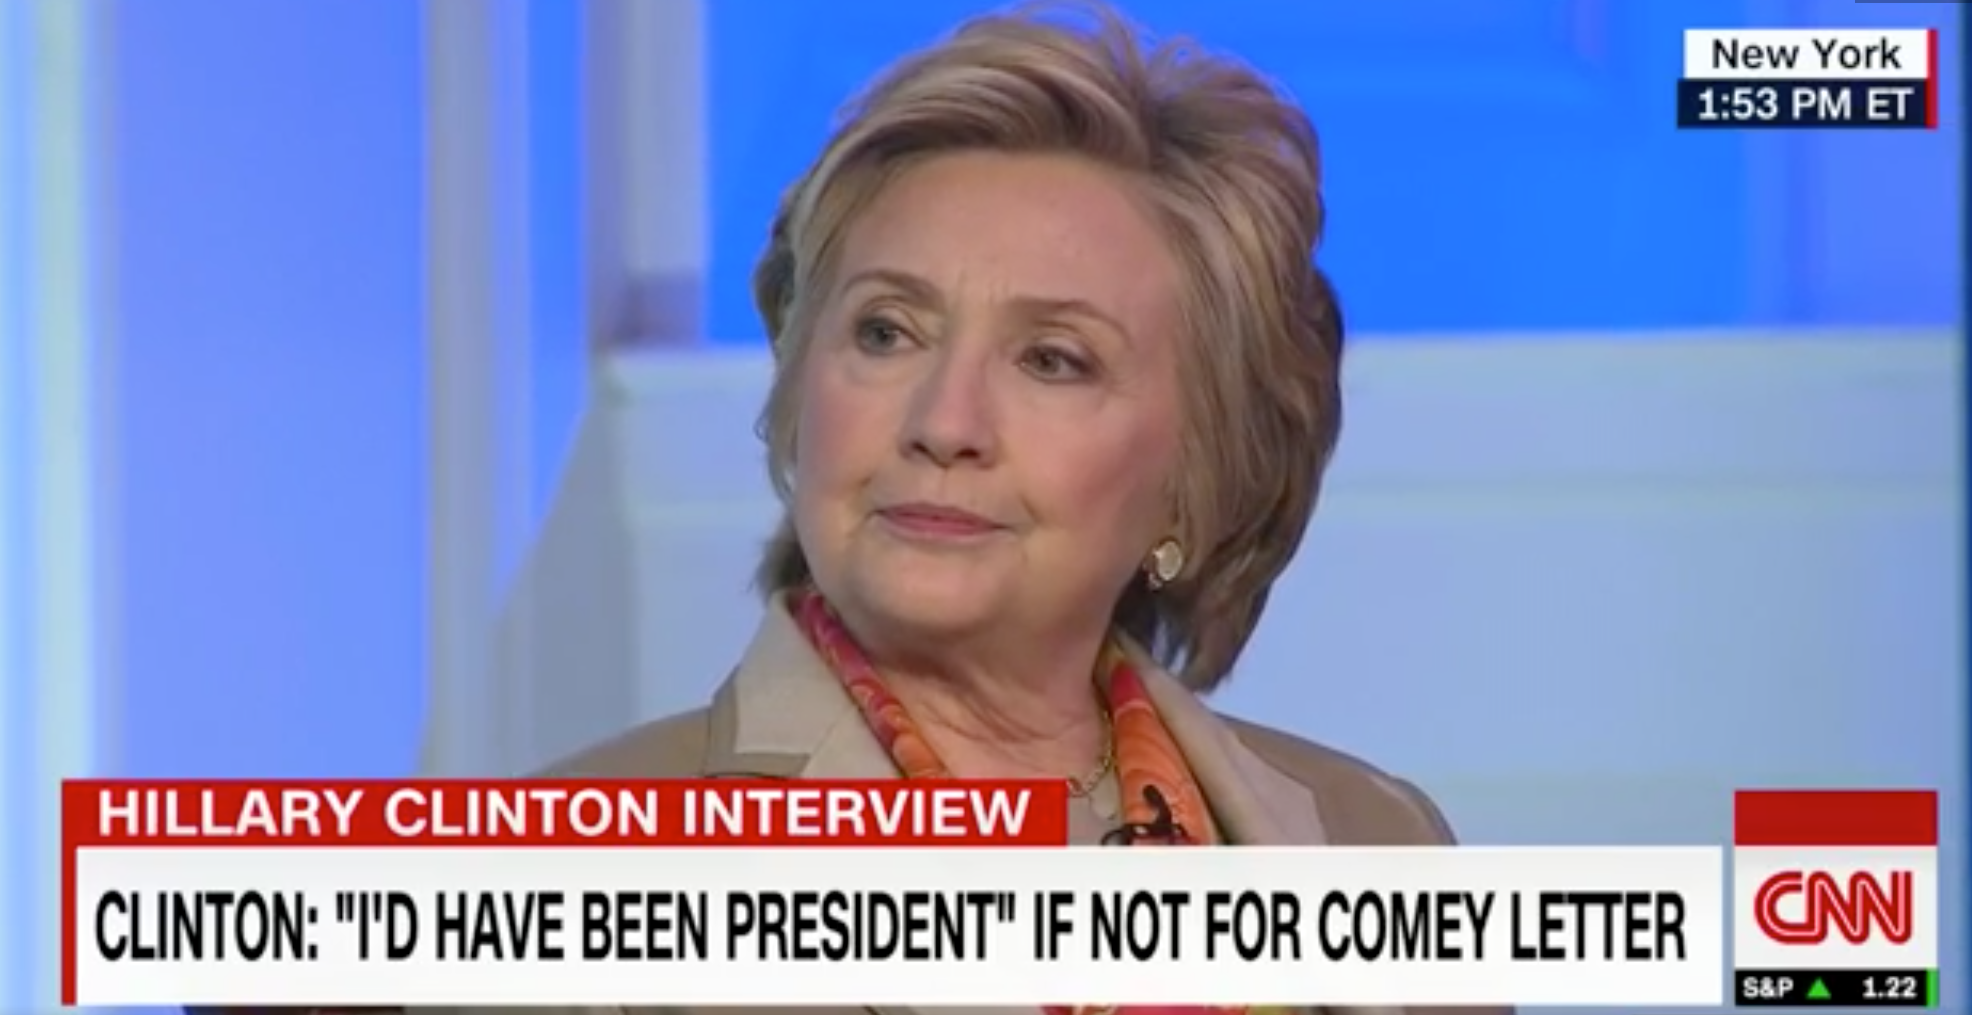 Even NBC skeptical of Hillary's excuses for losing